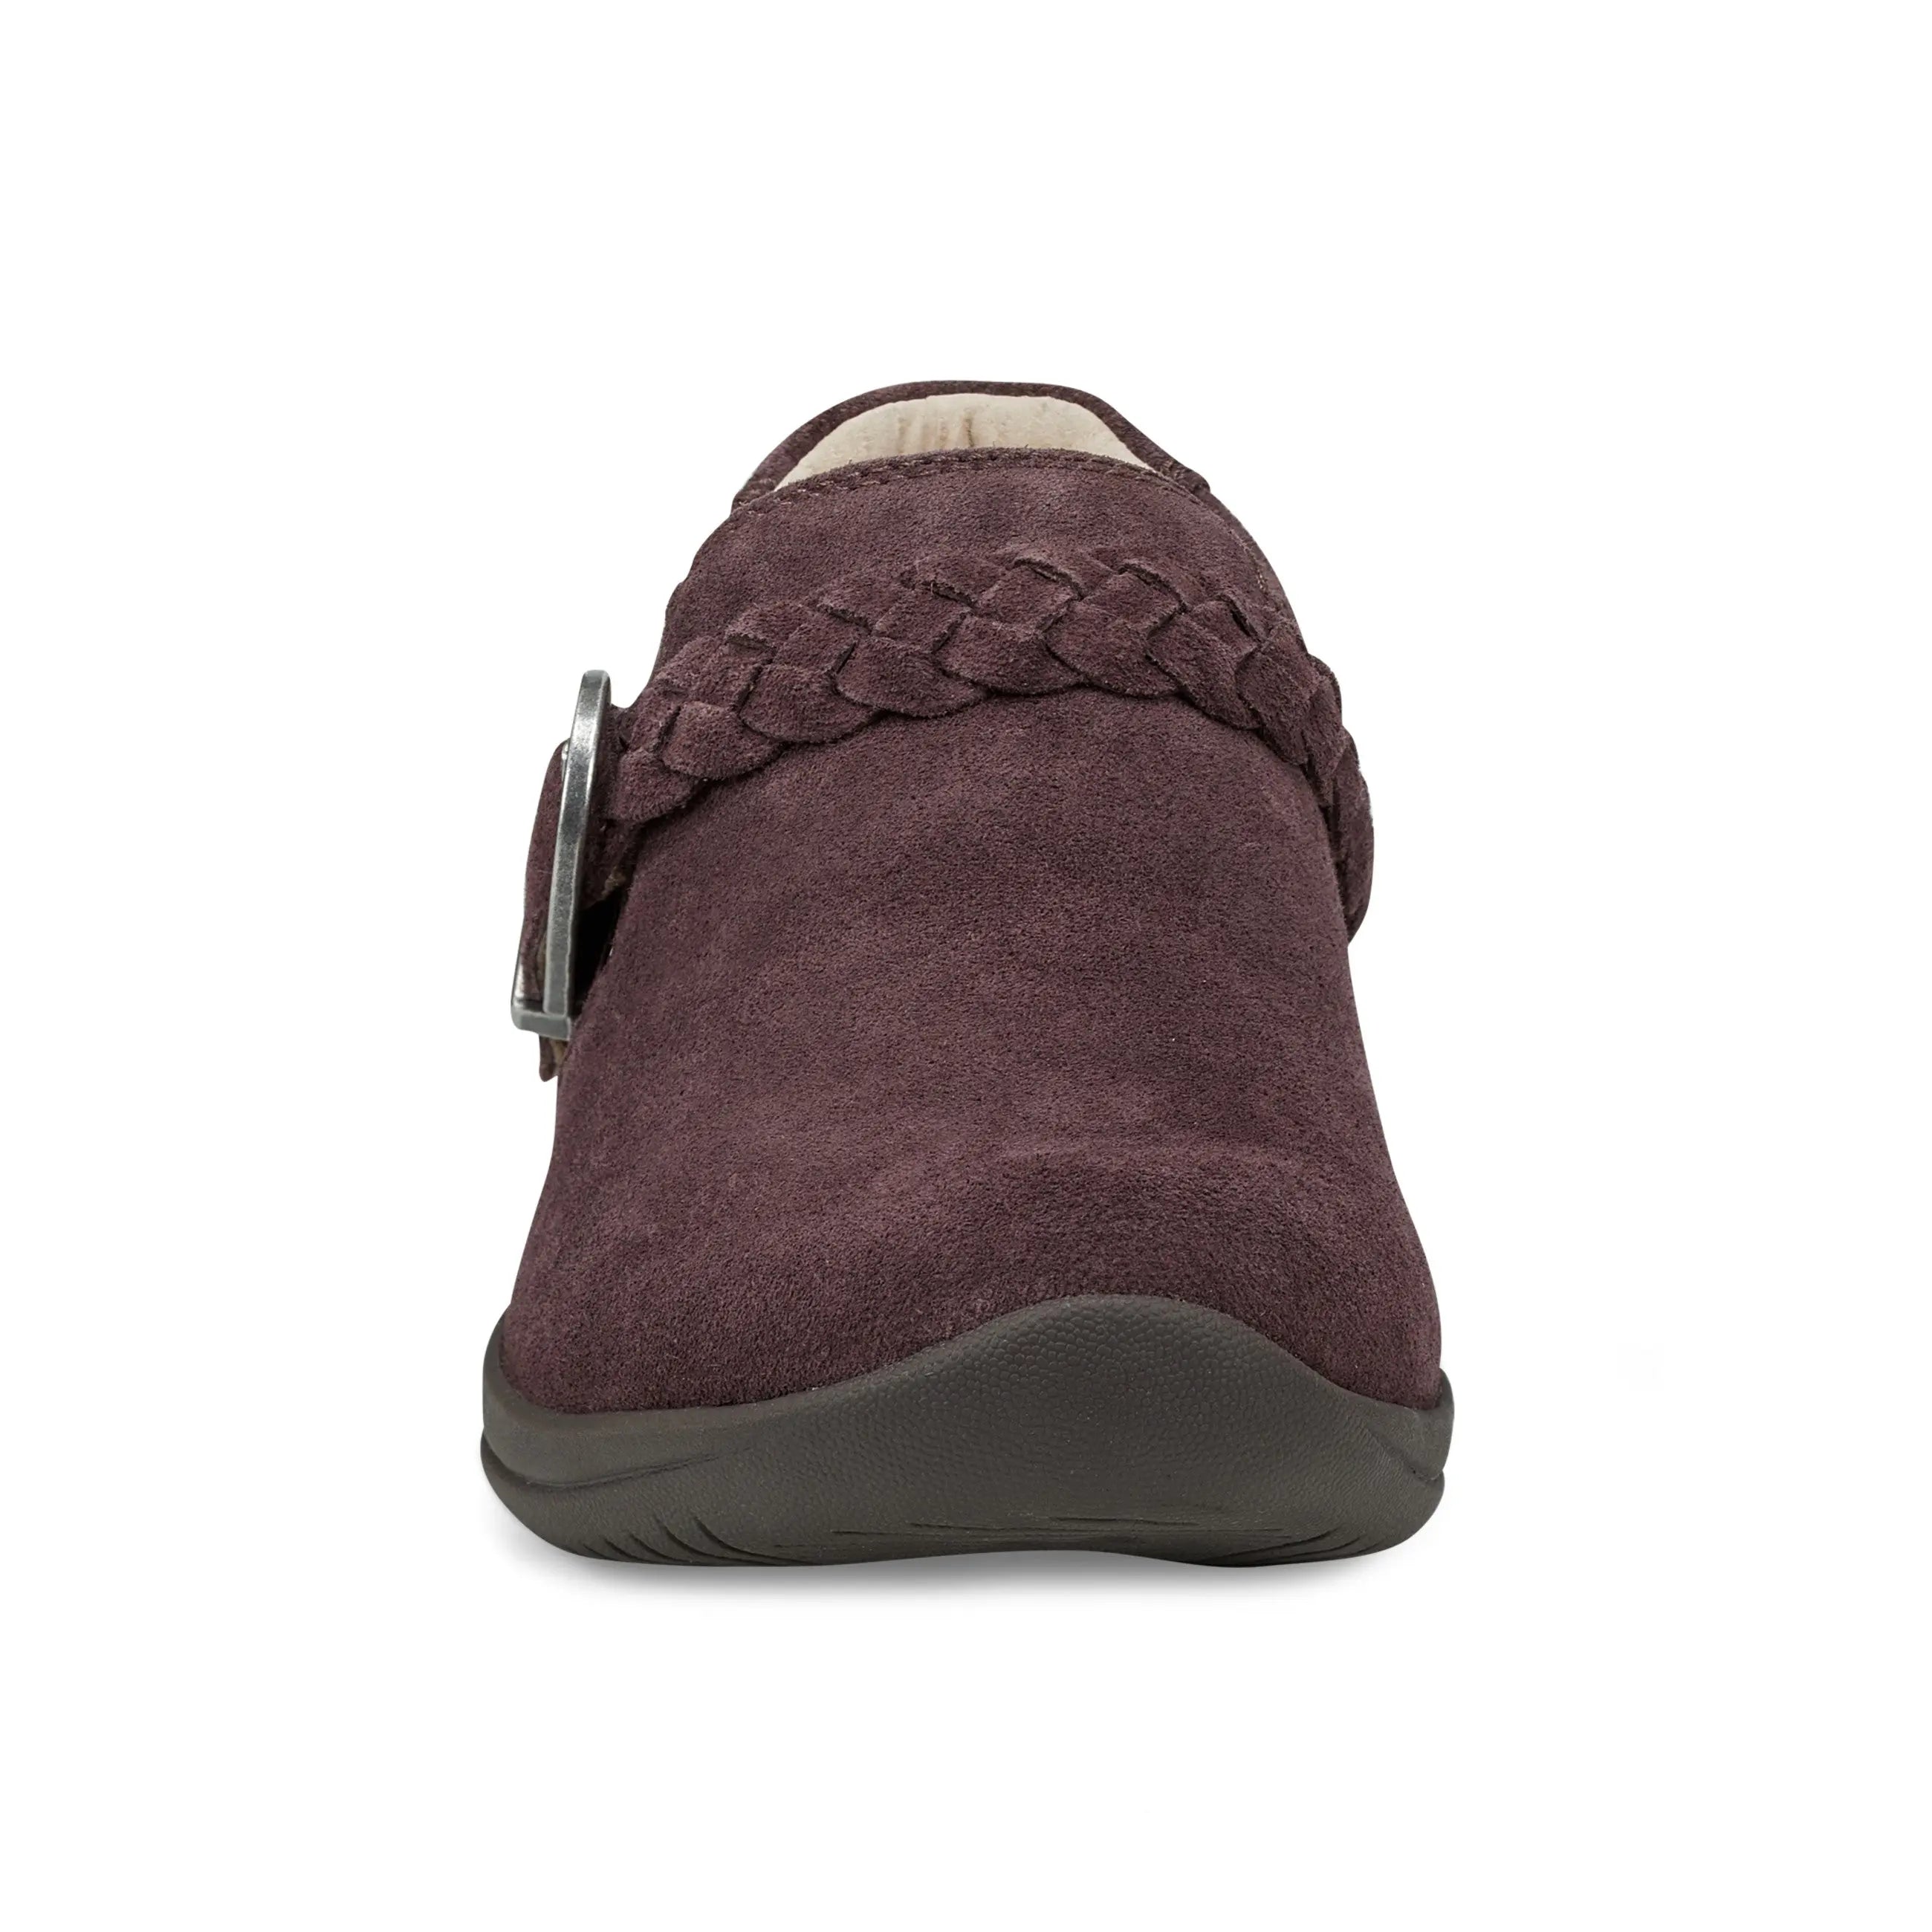 Farage Cold Weather Round Toe Casual Slip-on Flats